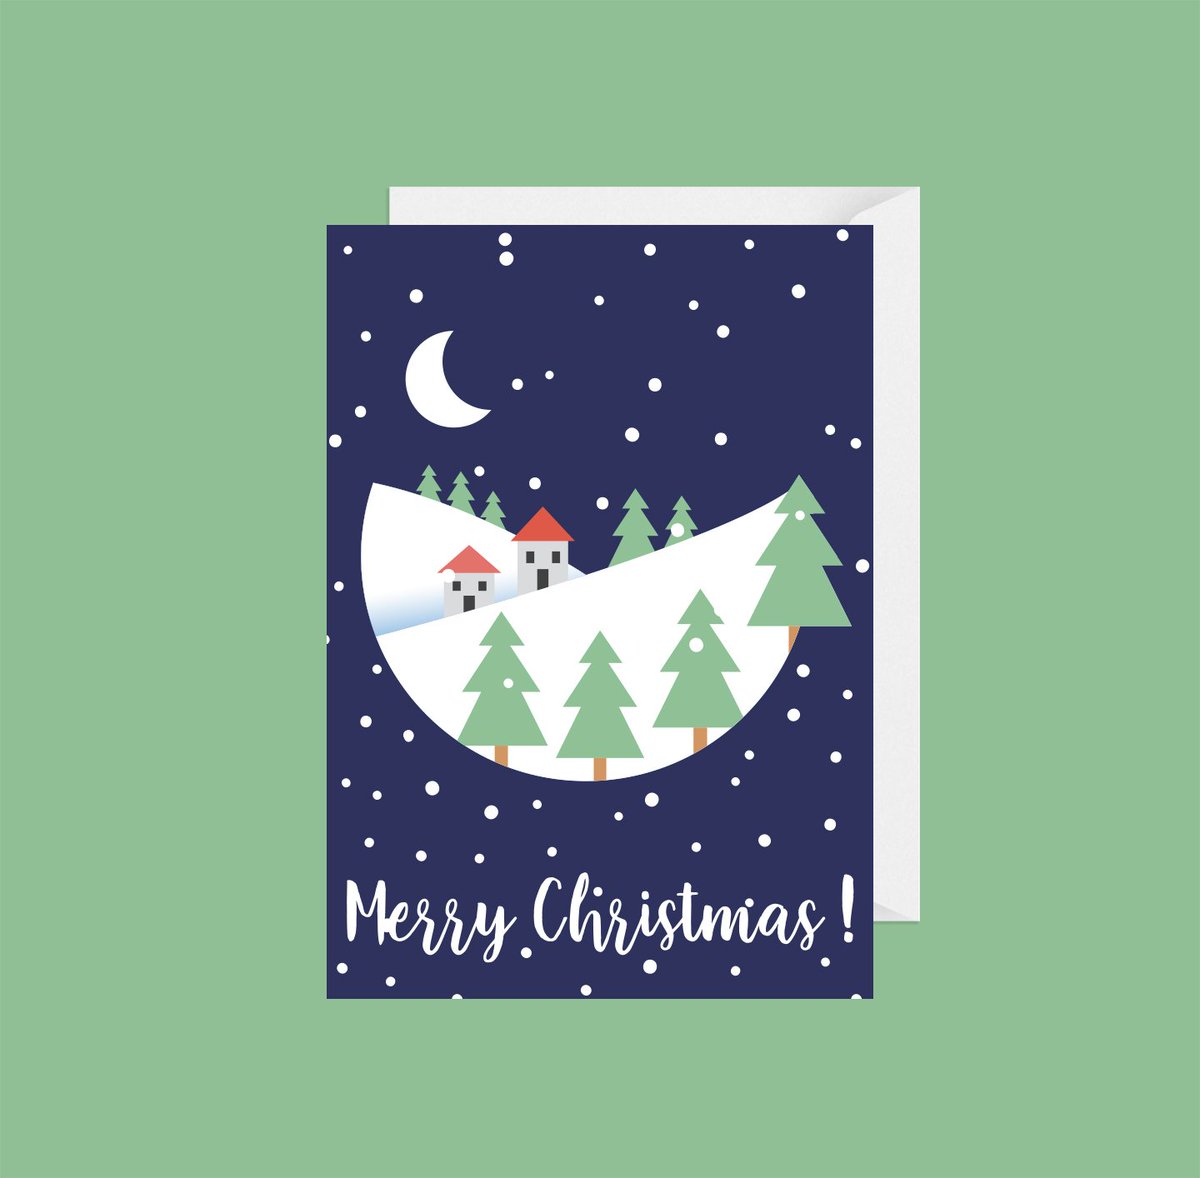 Excited to share the latest addition to my #etsy shop: Christmas gift card, #Snow #xmas #landscape
etsy.com/shop/JMerciPri…

#papergoods #cards #blue #christmas #white #christmasgiftcard #merrychristmas #snowlandscape #xmasgiftcard